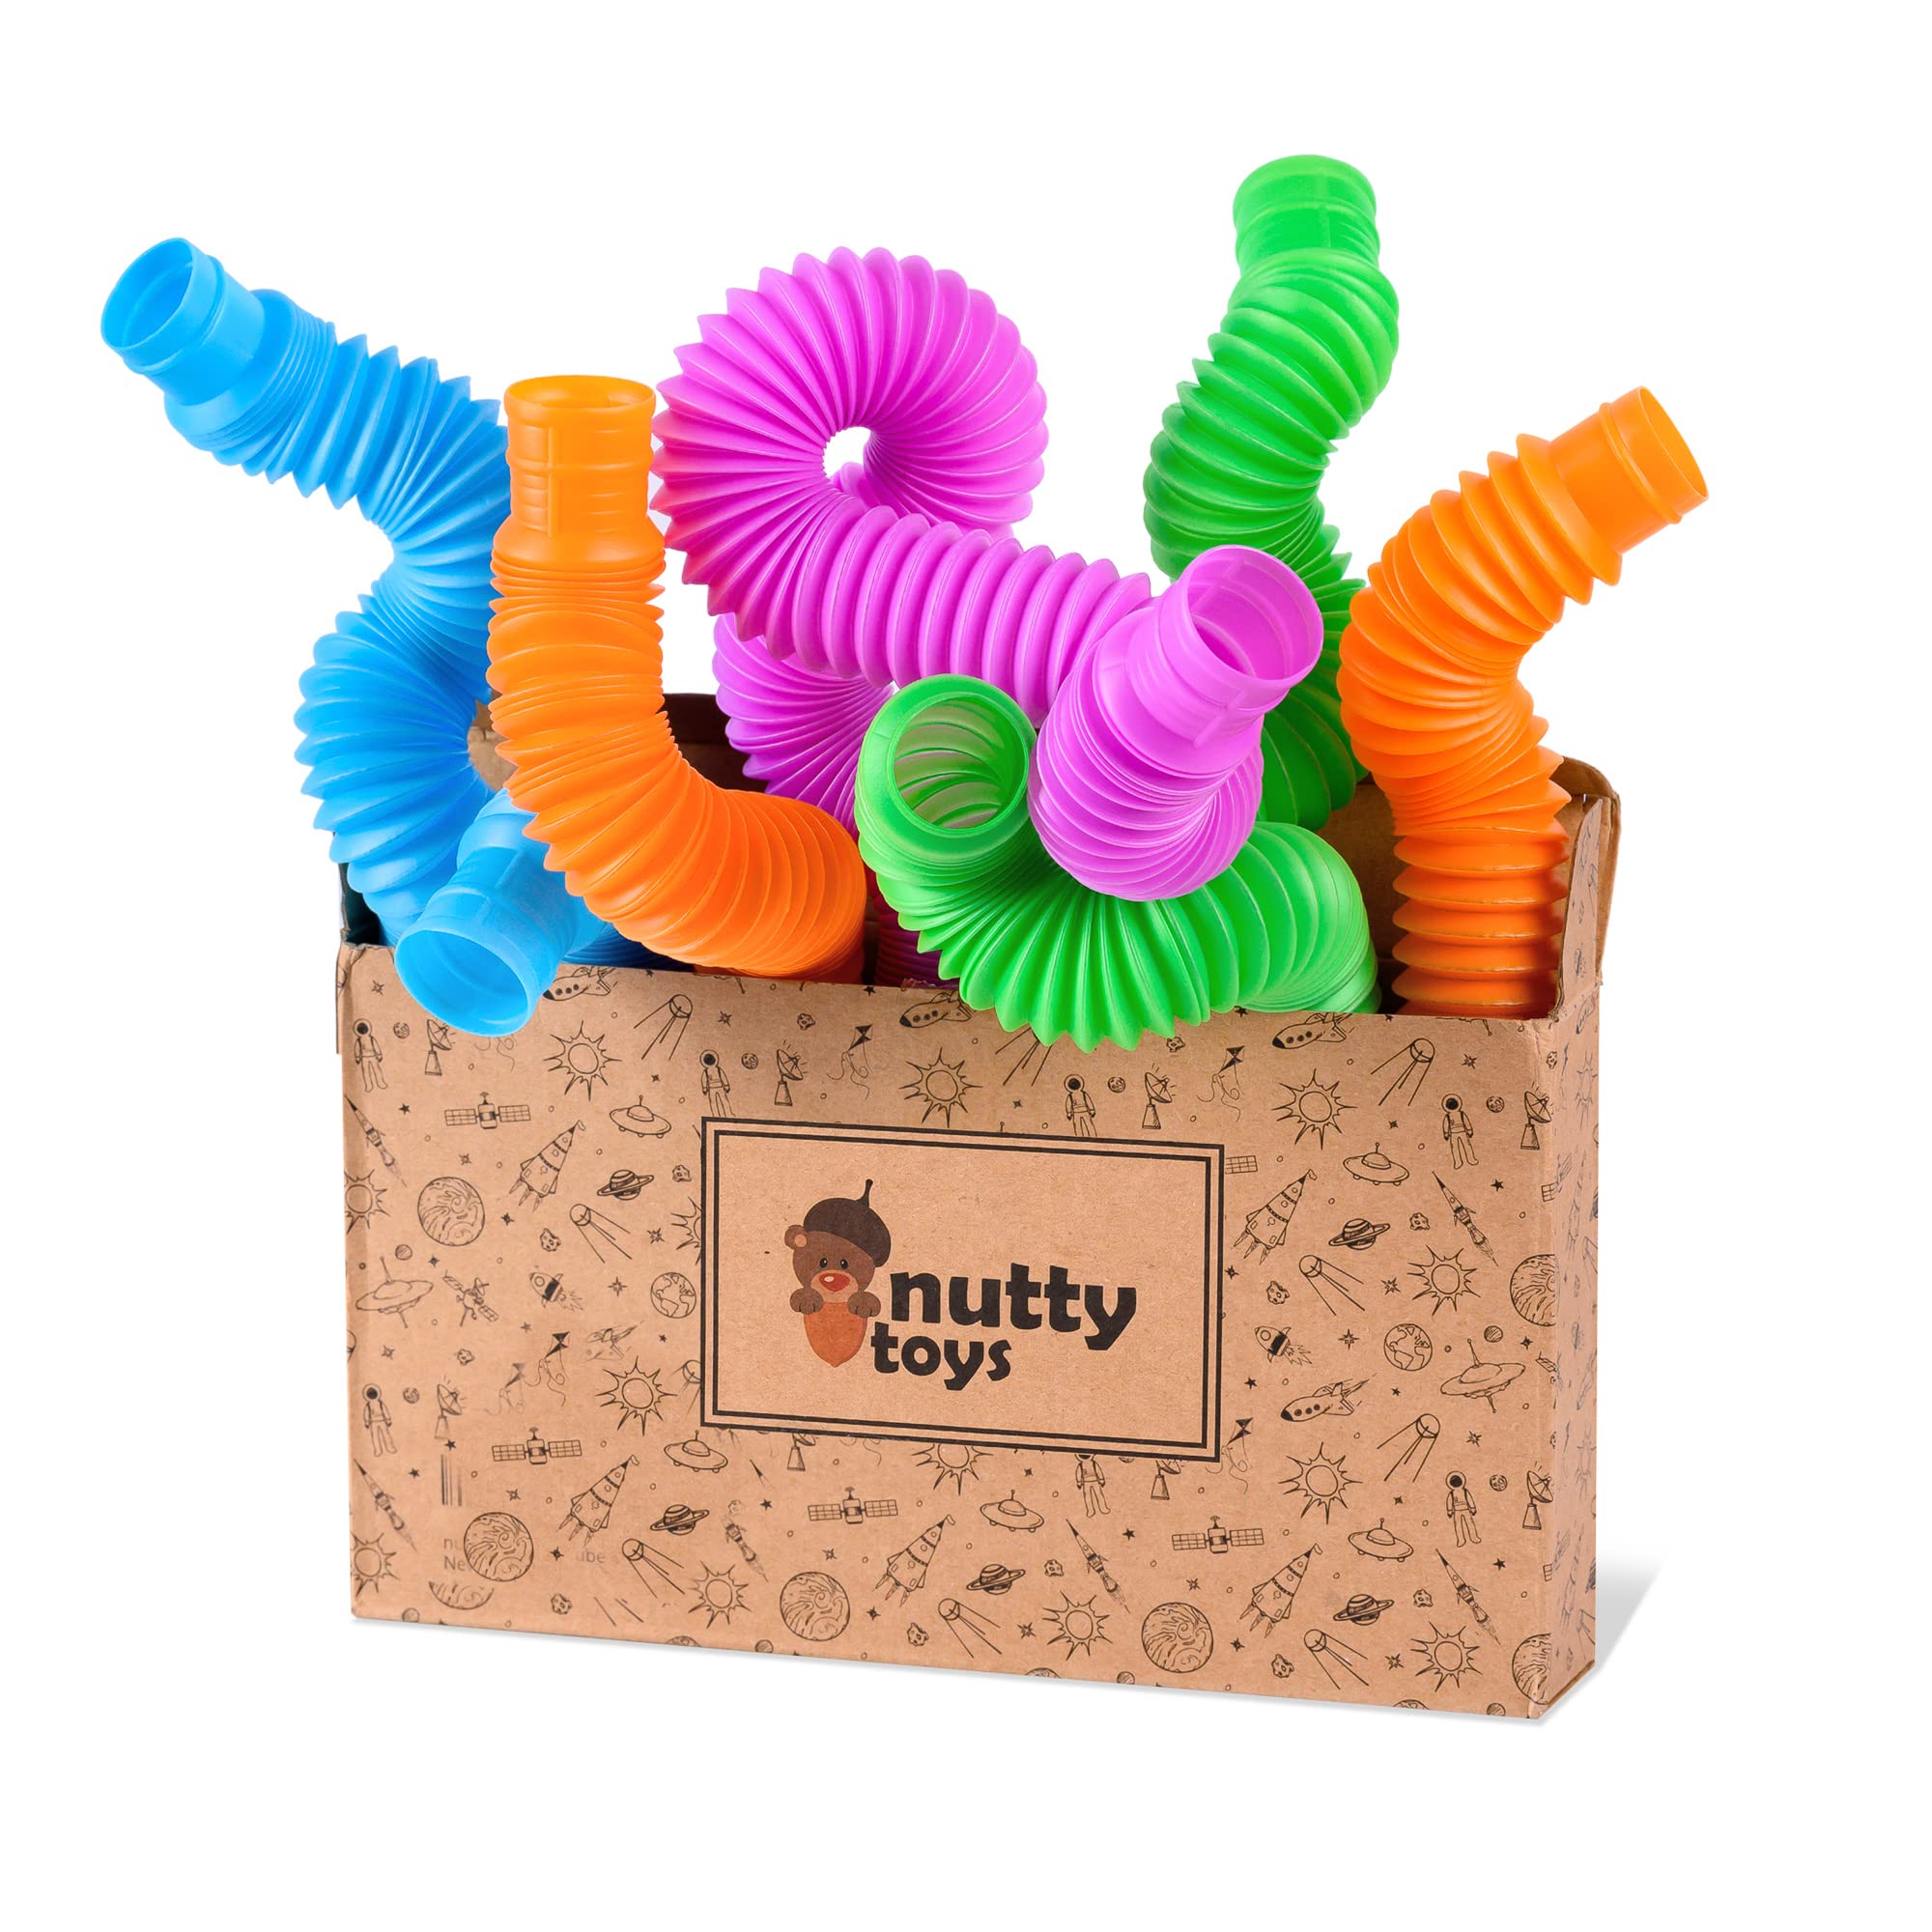 Nutty Toys Pop Tubes Sensory Toys, Large - Toddler Activities Toy & Fine Motor Skills Learning for 18 Month & 1 2 Year Old Top Preschool Boys Girls Kids & Baby Car Travel Gifts 2023 Best Autism Fidget